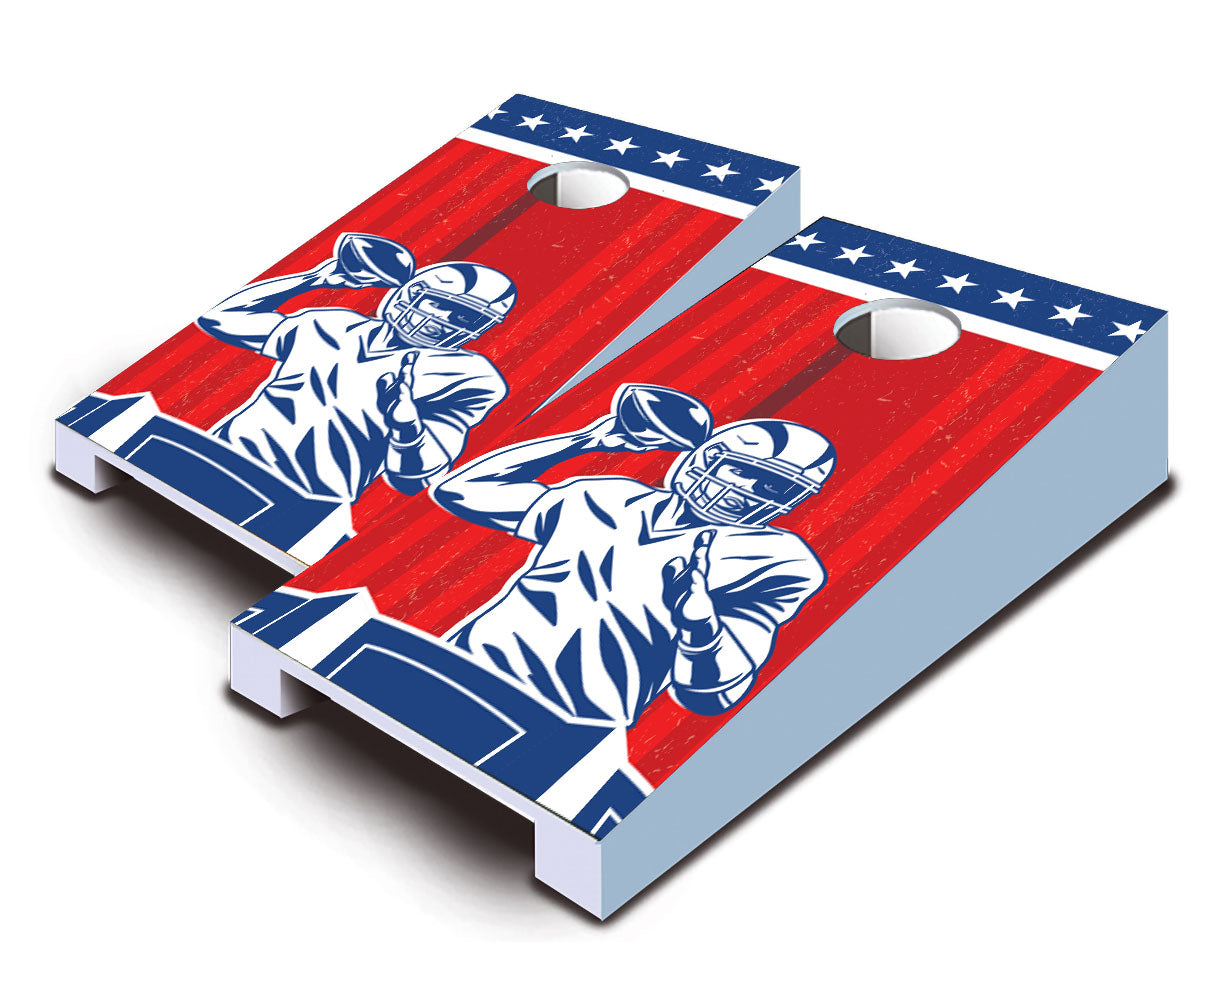 "Red, White and Blue American Football" Tabletop Cornhole Boards